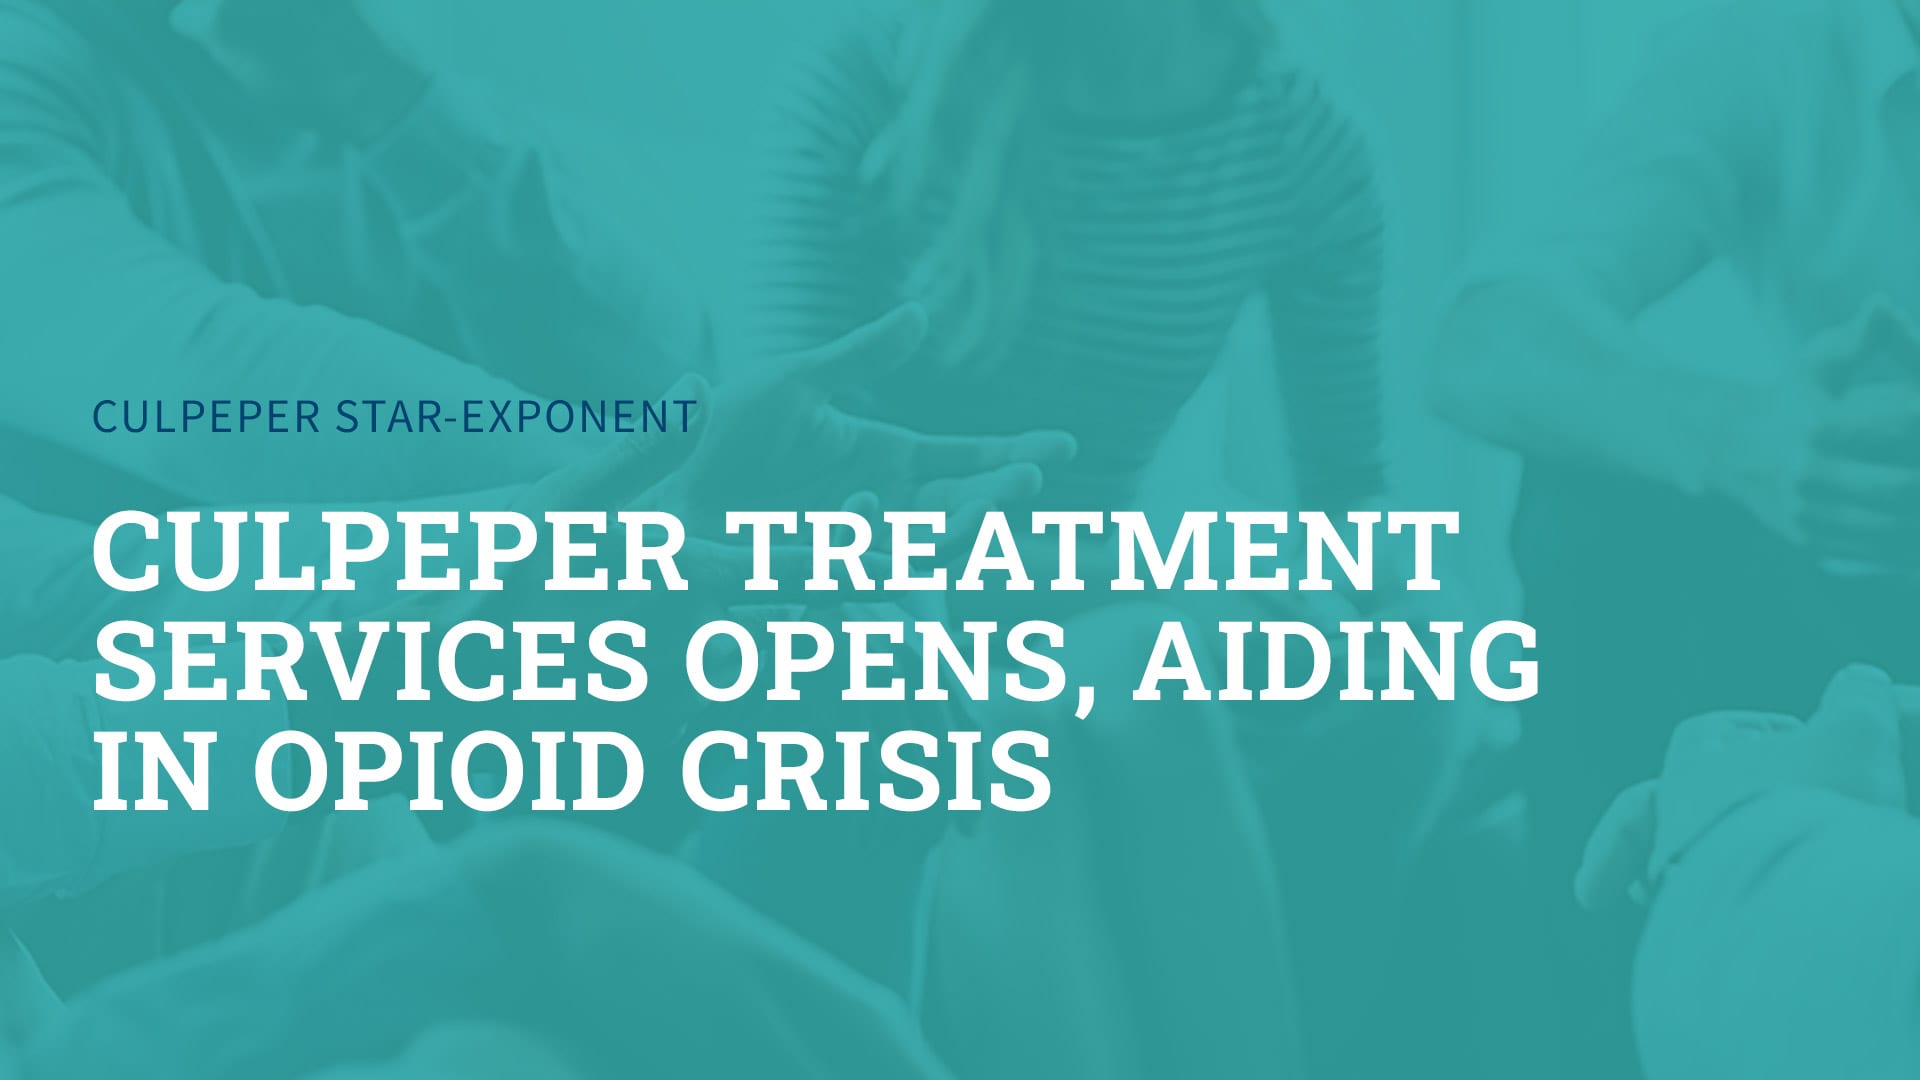 Culpeper Treatment Services Opens, Aiding in Opioid Crisis